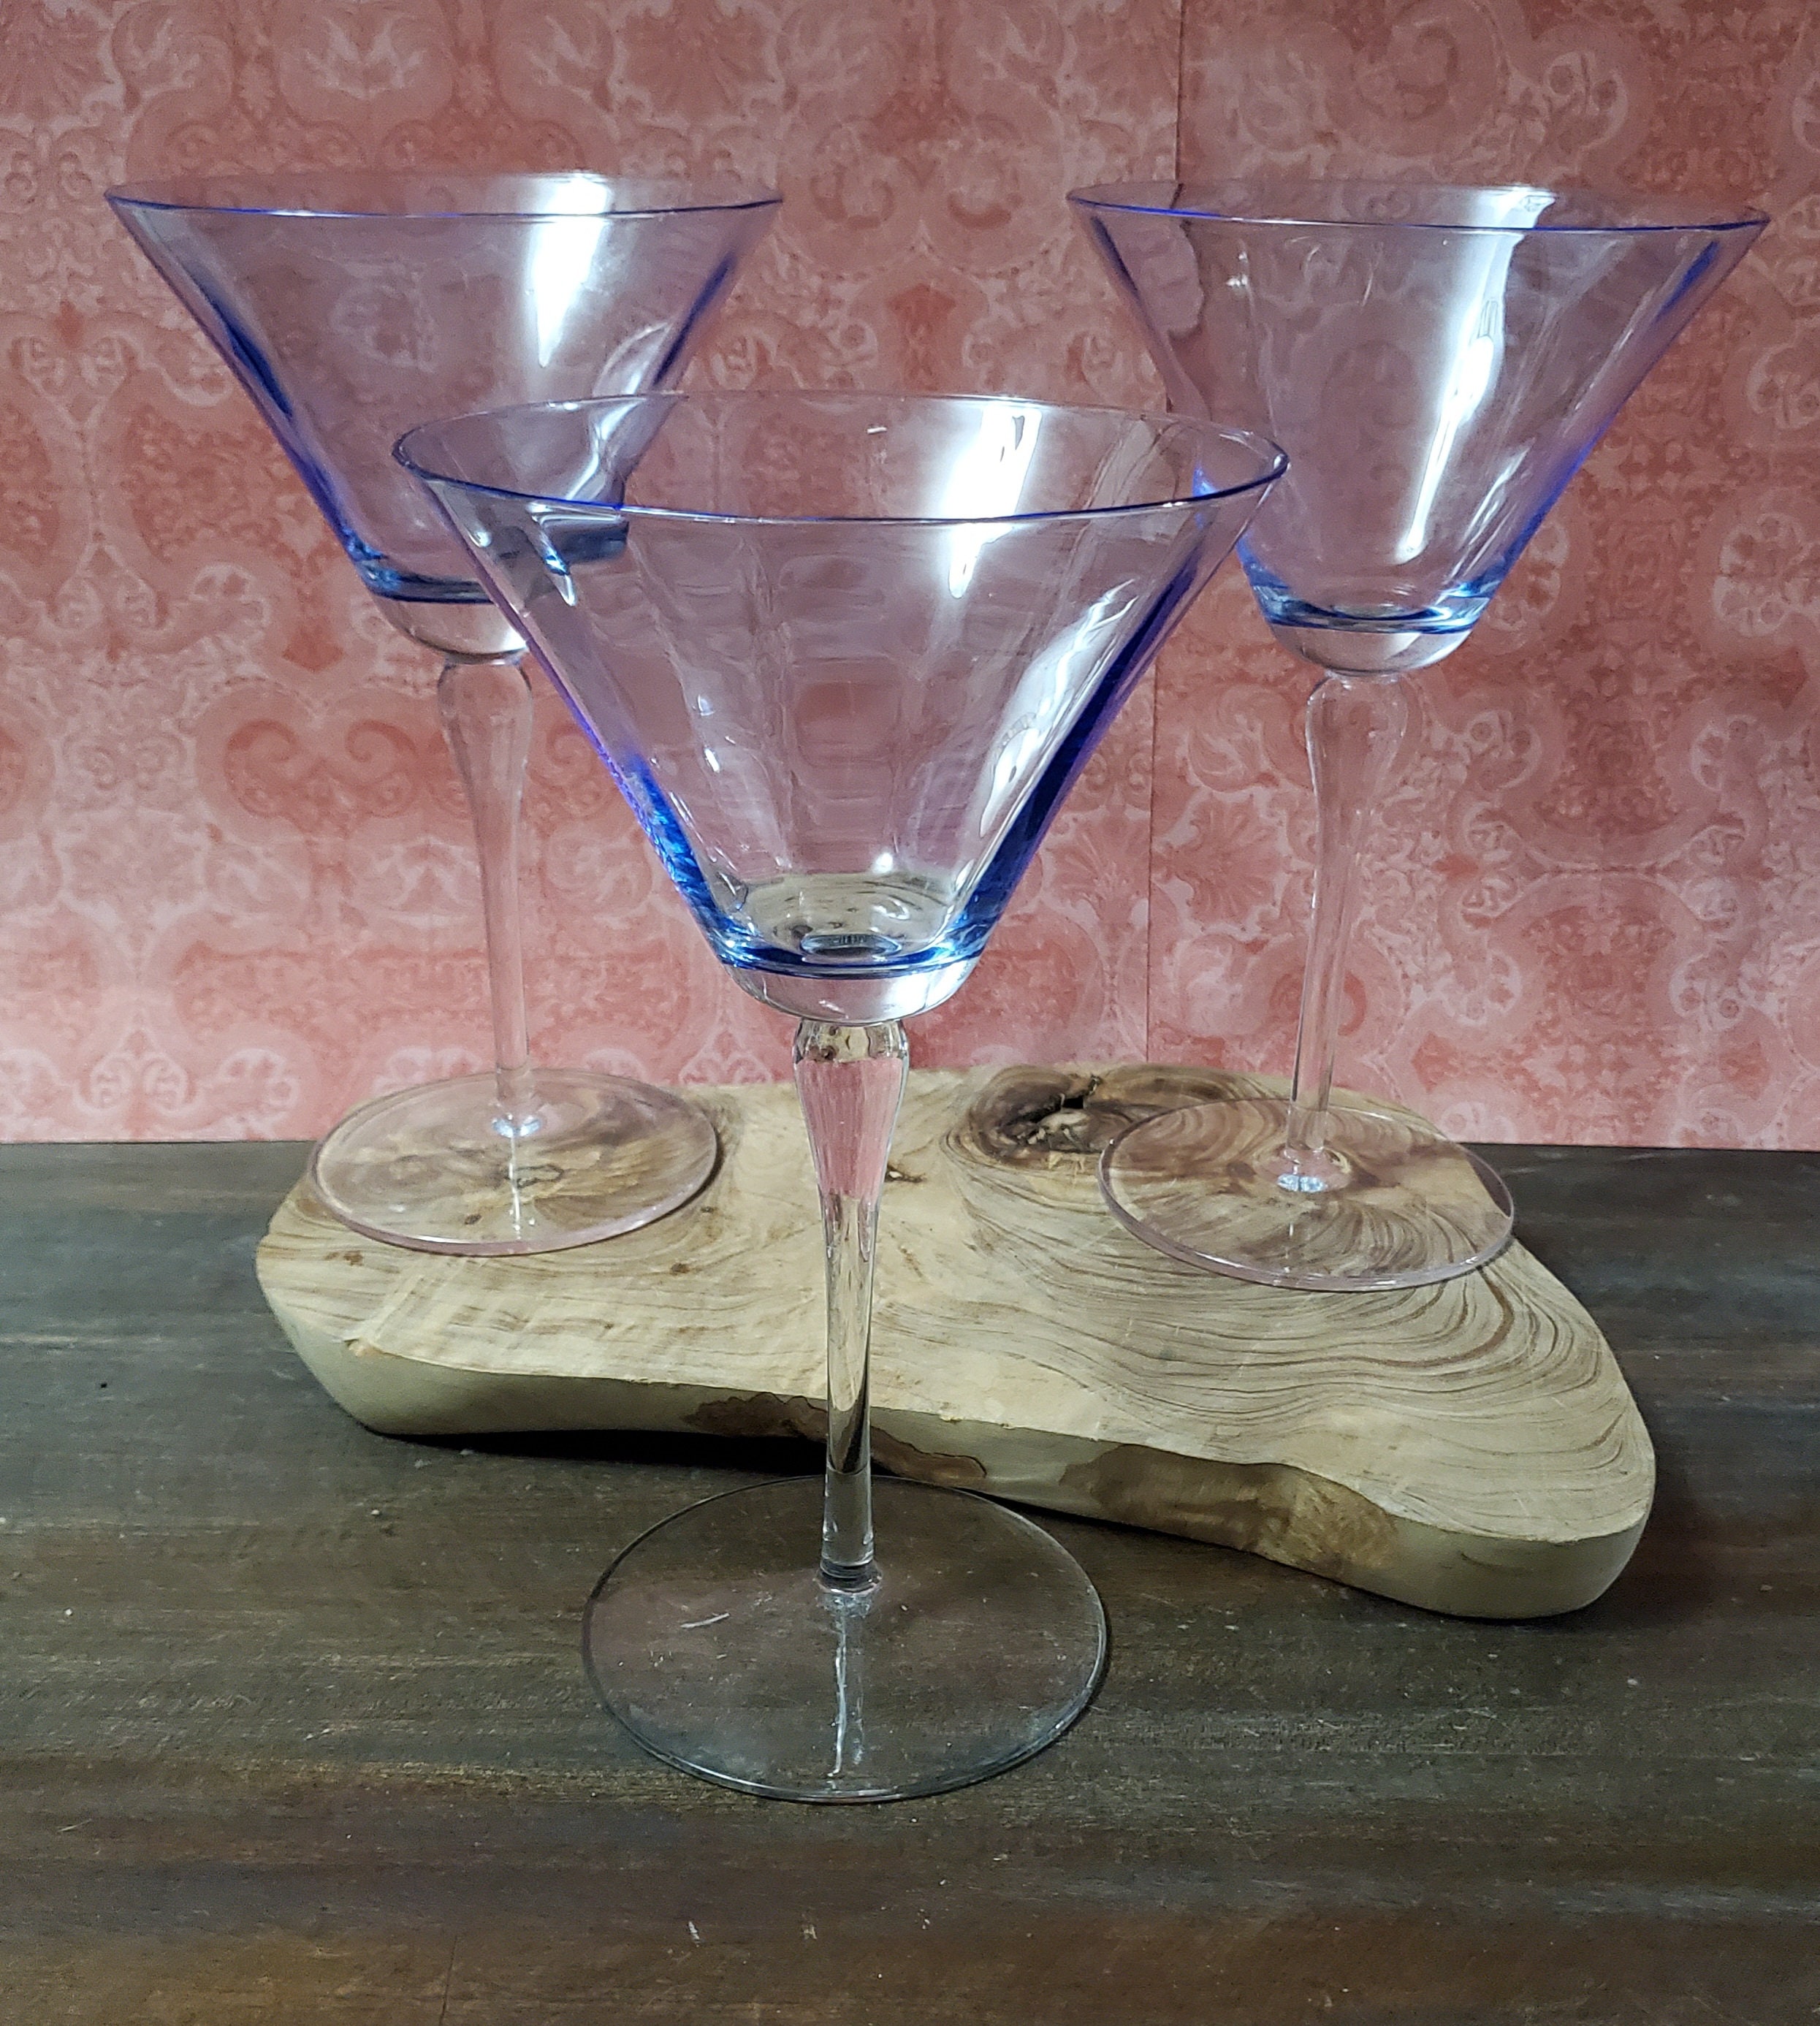 Party of the Century Classic Martini Glass (Gift Box Set of 2